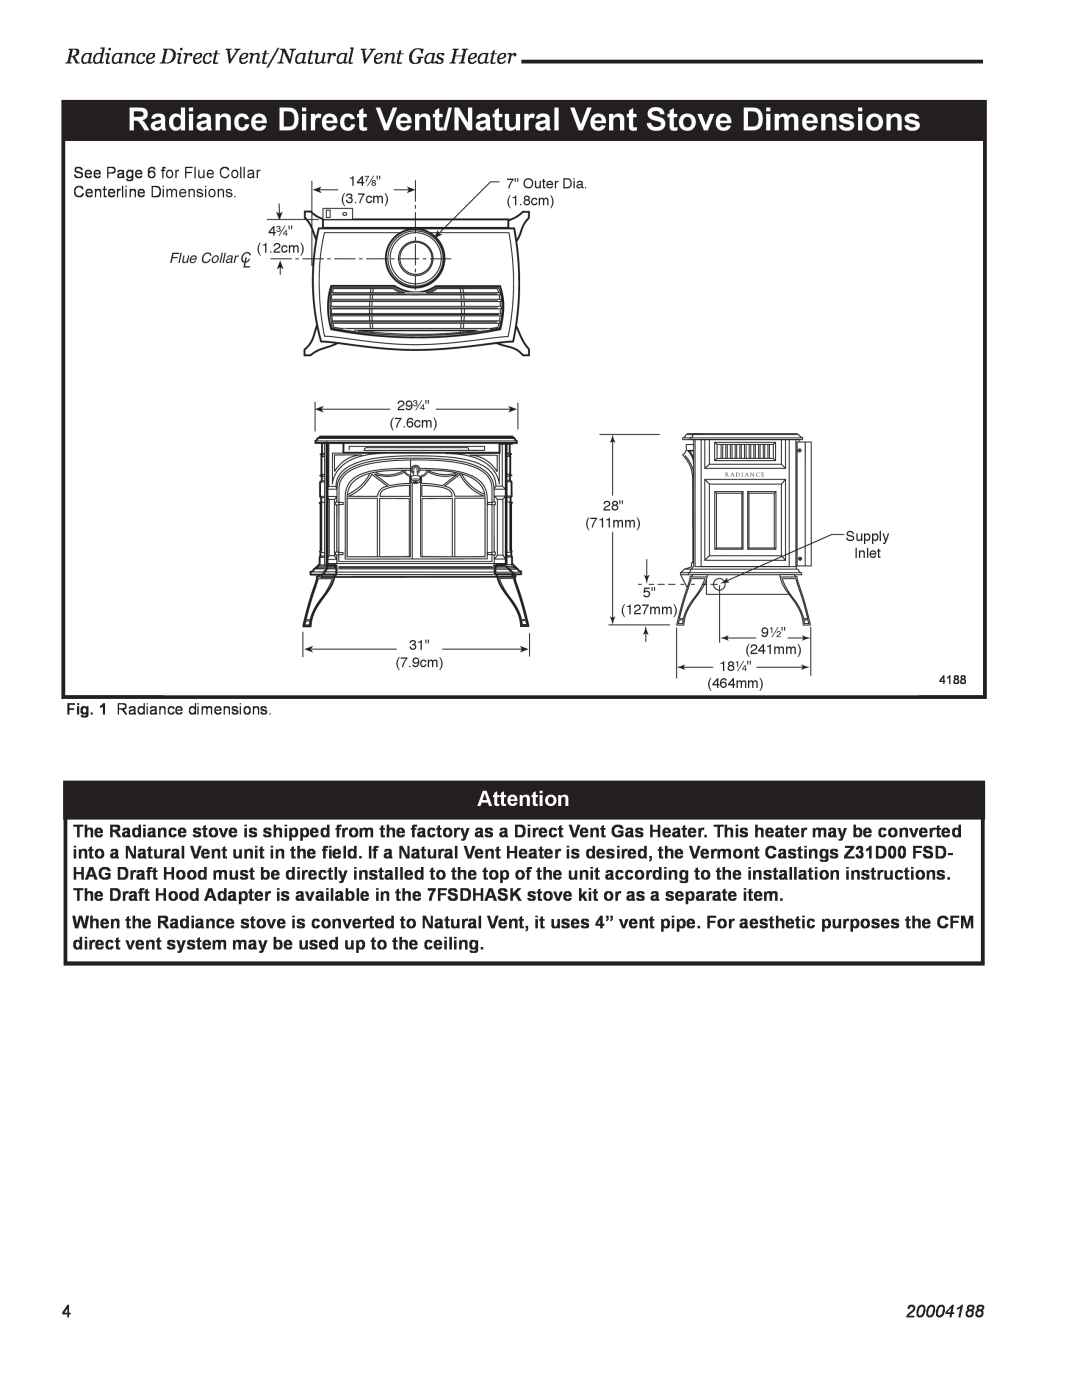 Vermont Casting RDVOD 3350 Radiance Direct Vent/Natural Vent Gas Heater, 20004188, See Page 6 for Flue Collar, Outer Dia 